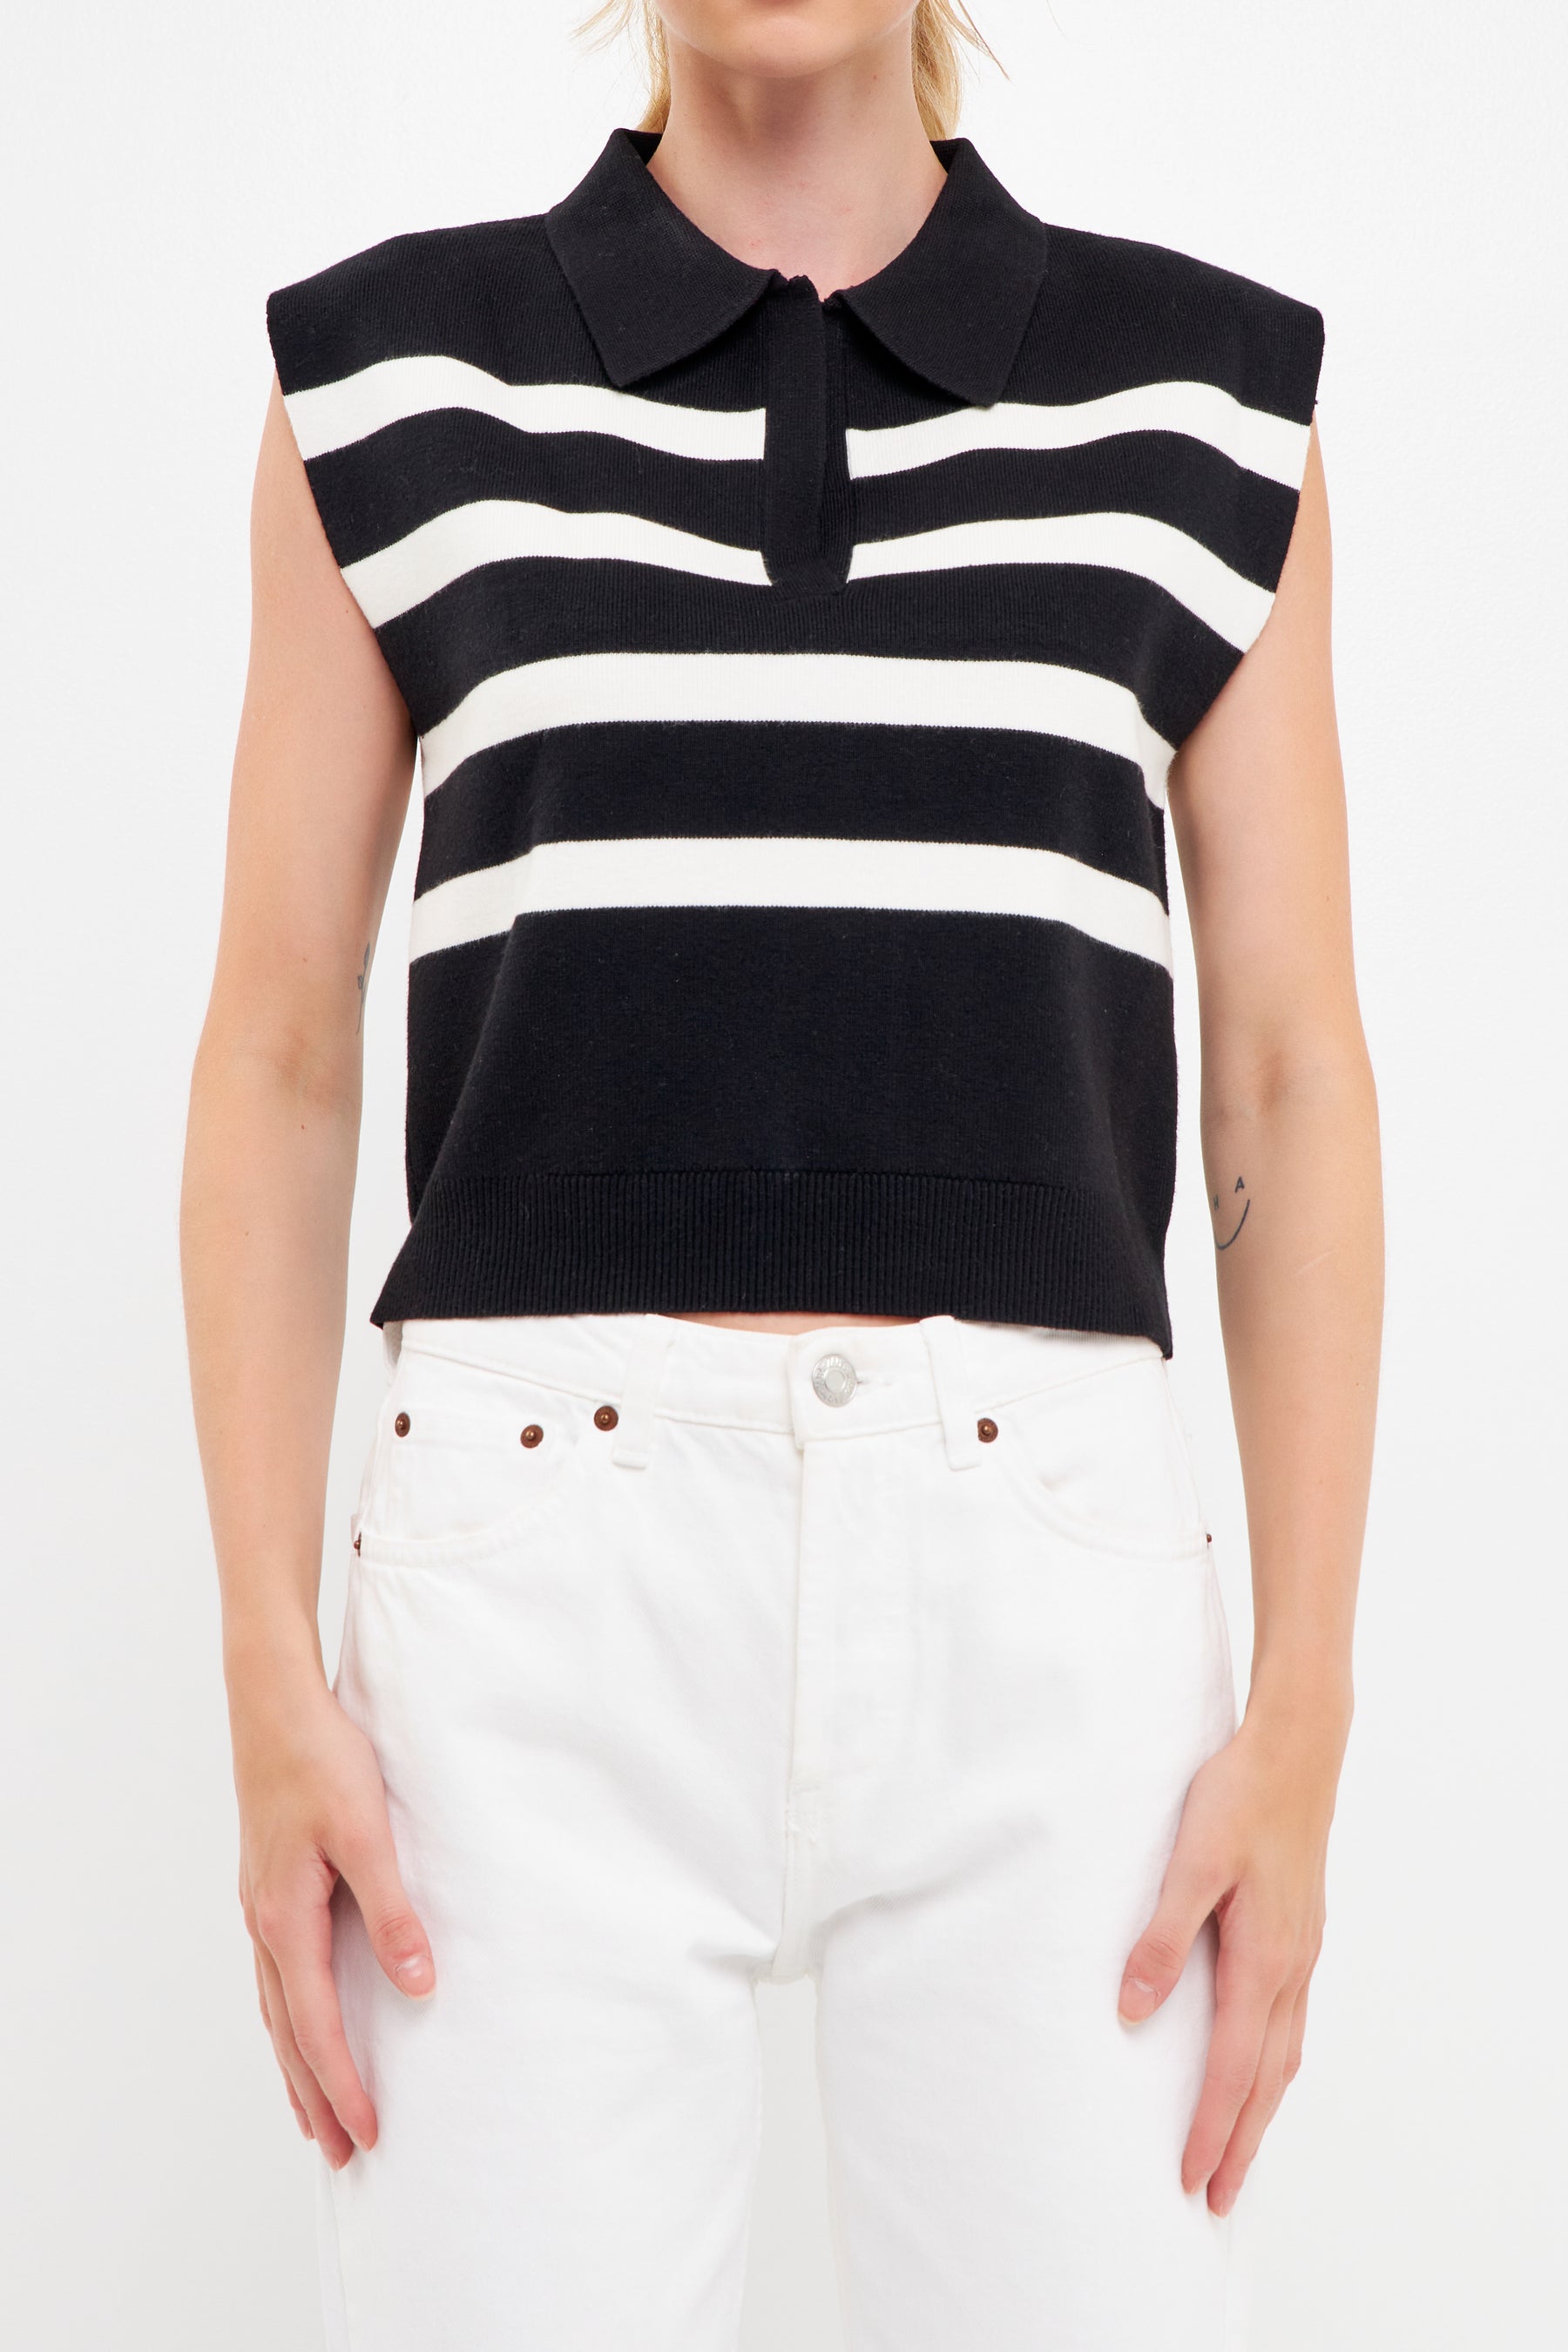 ENGLISH FACTORY - Striped Knit Top with Collar - SWEATERS & KNITS available at Objectrare